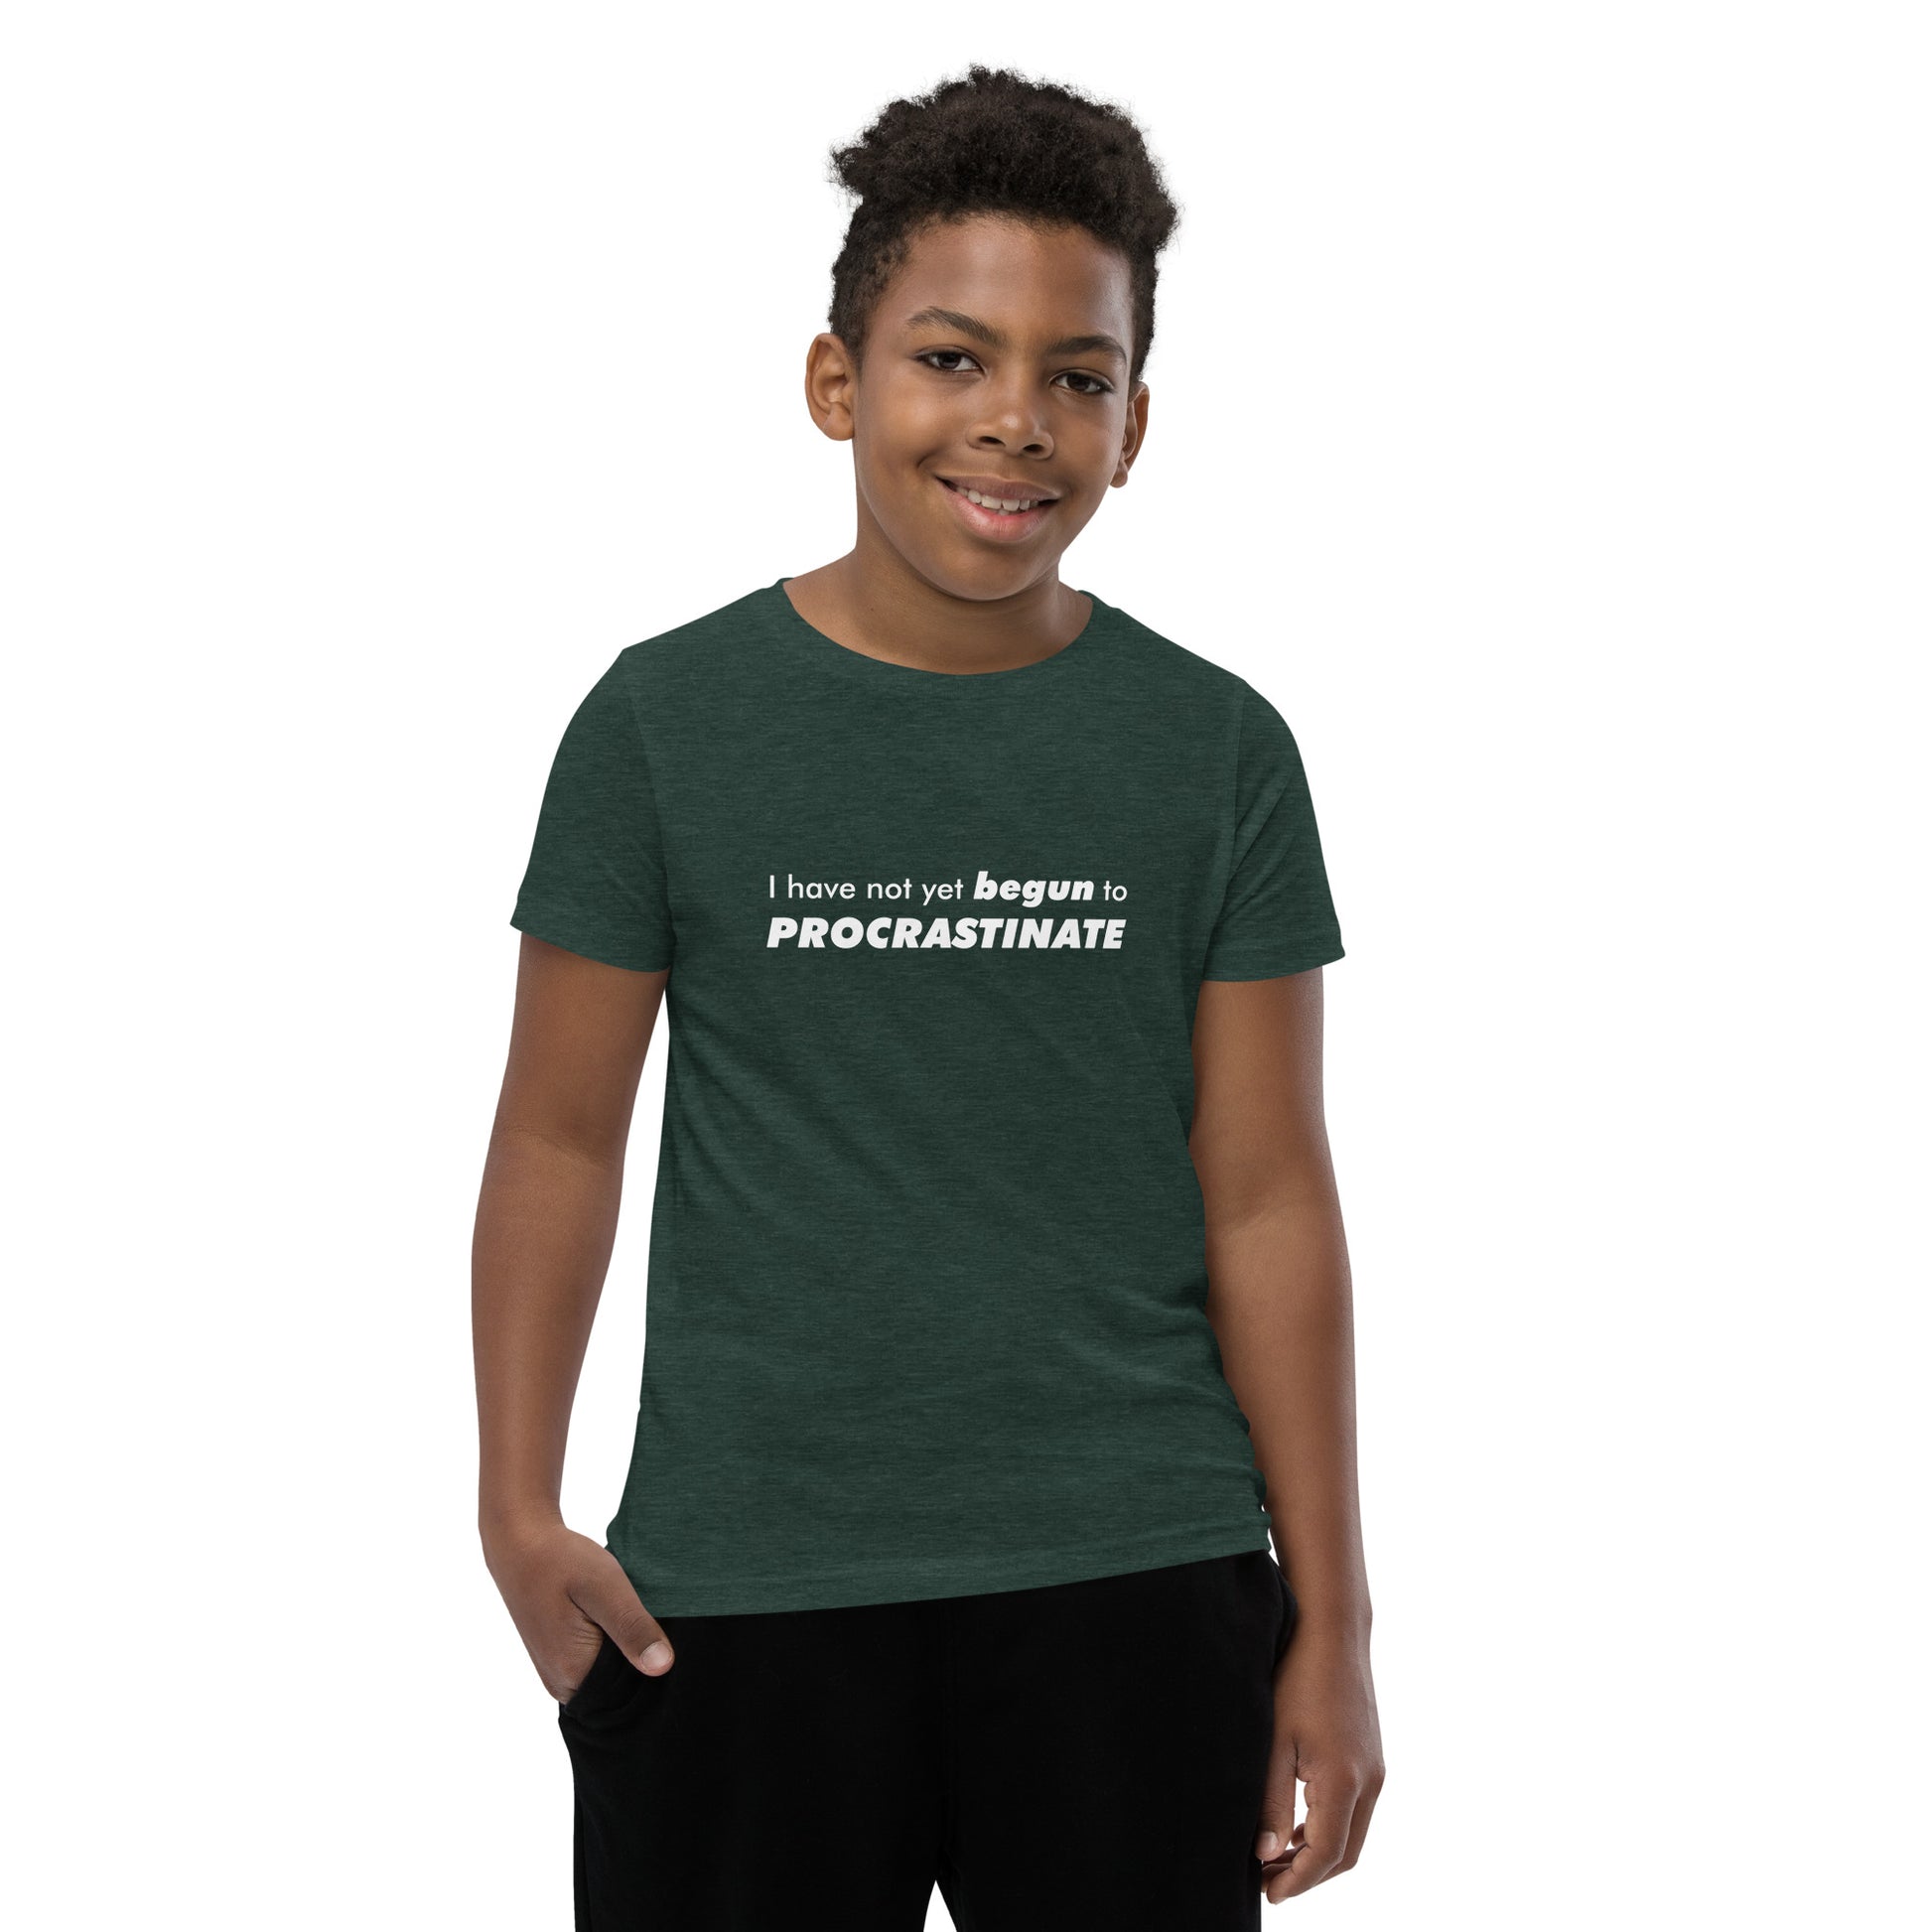 Young male model wearing Heather Forest youth t-shirt with text graphic: "I have not yet BEGUN to PROCRASTINATE"